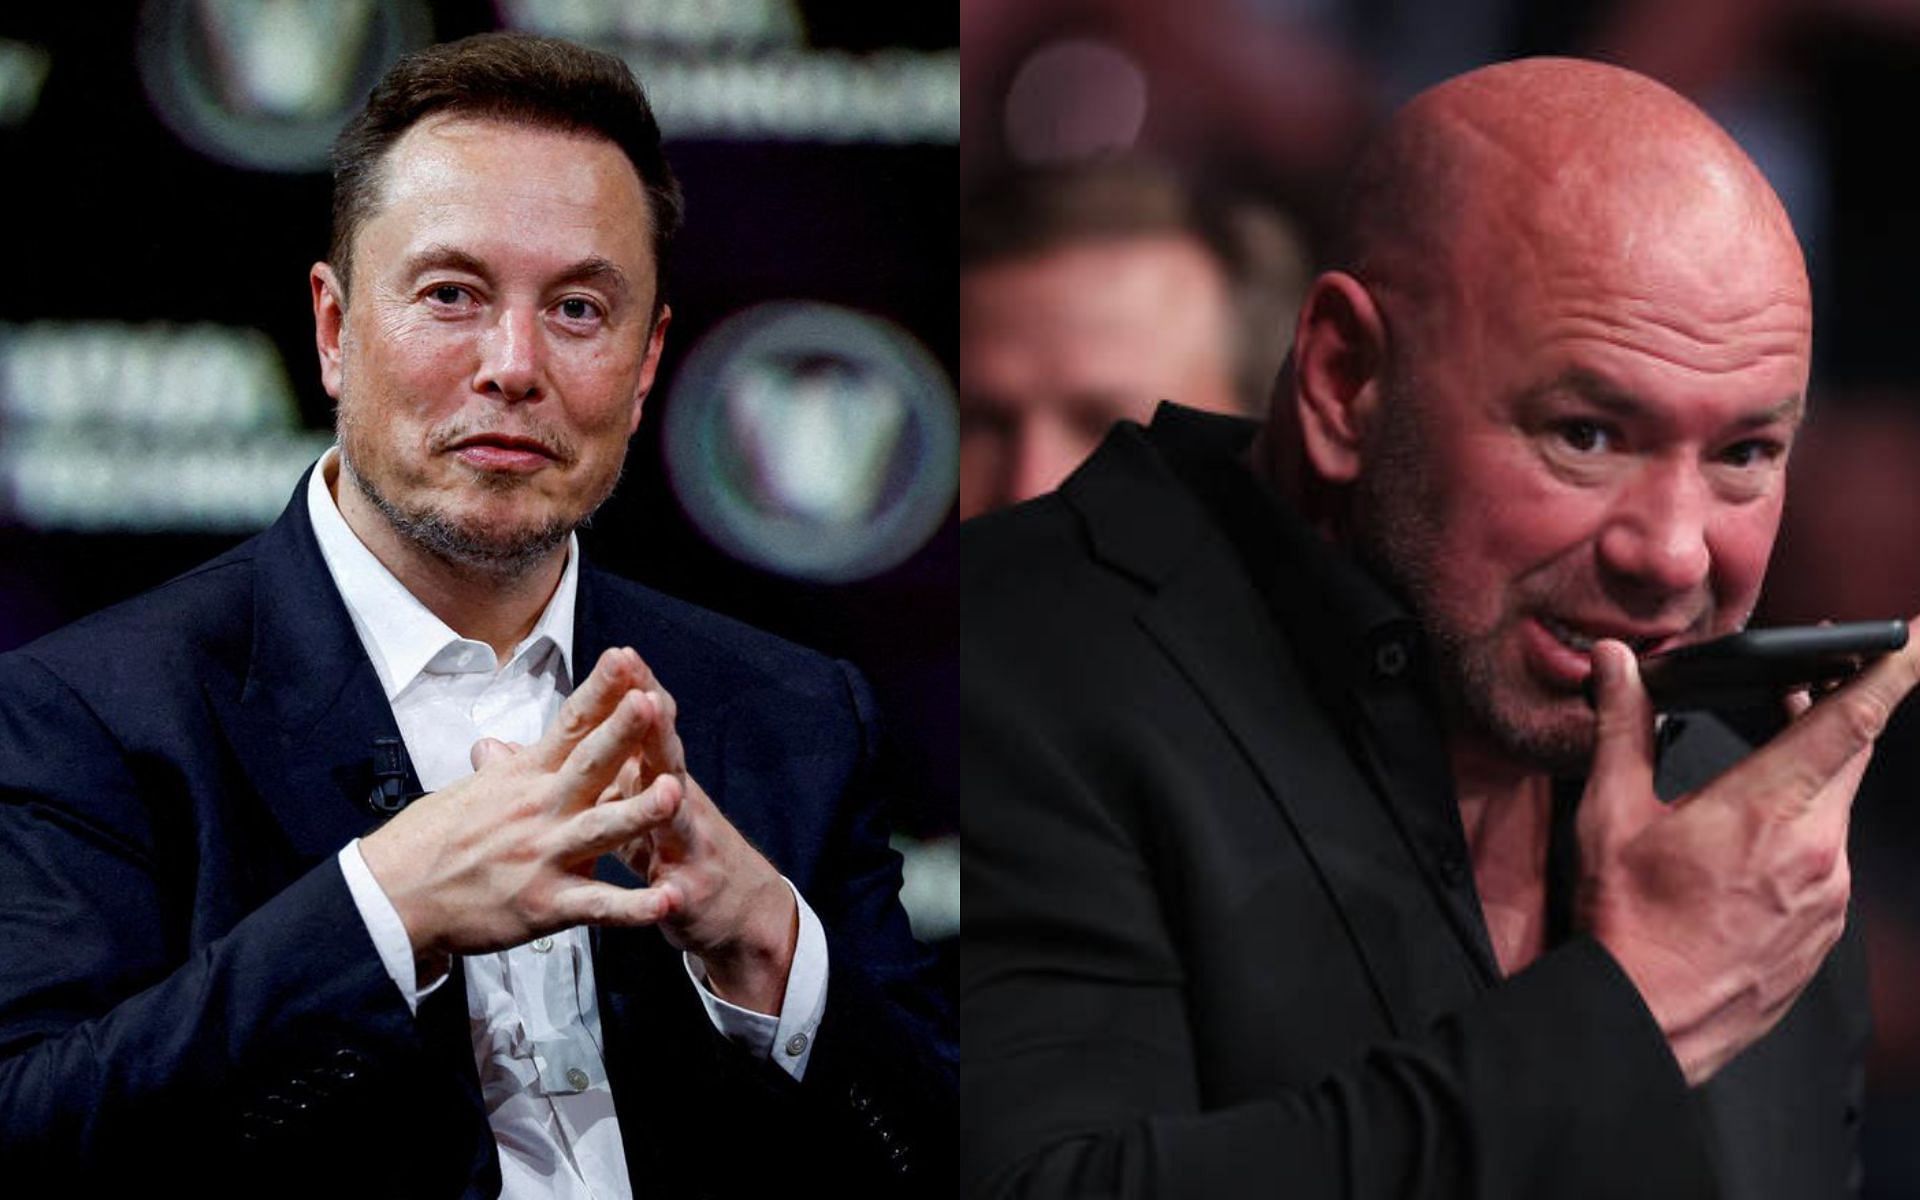 Elon Musk (left) and Dana White (right) (Image credits @danawhite on Instagram and @Travis_in_Flint on X)